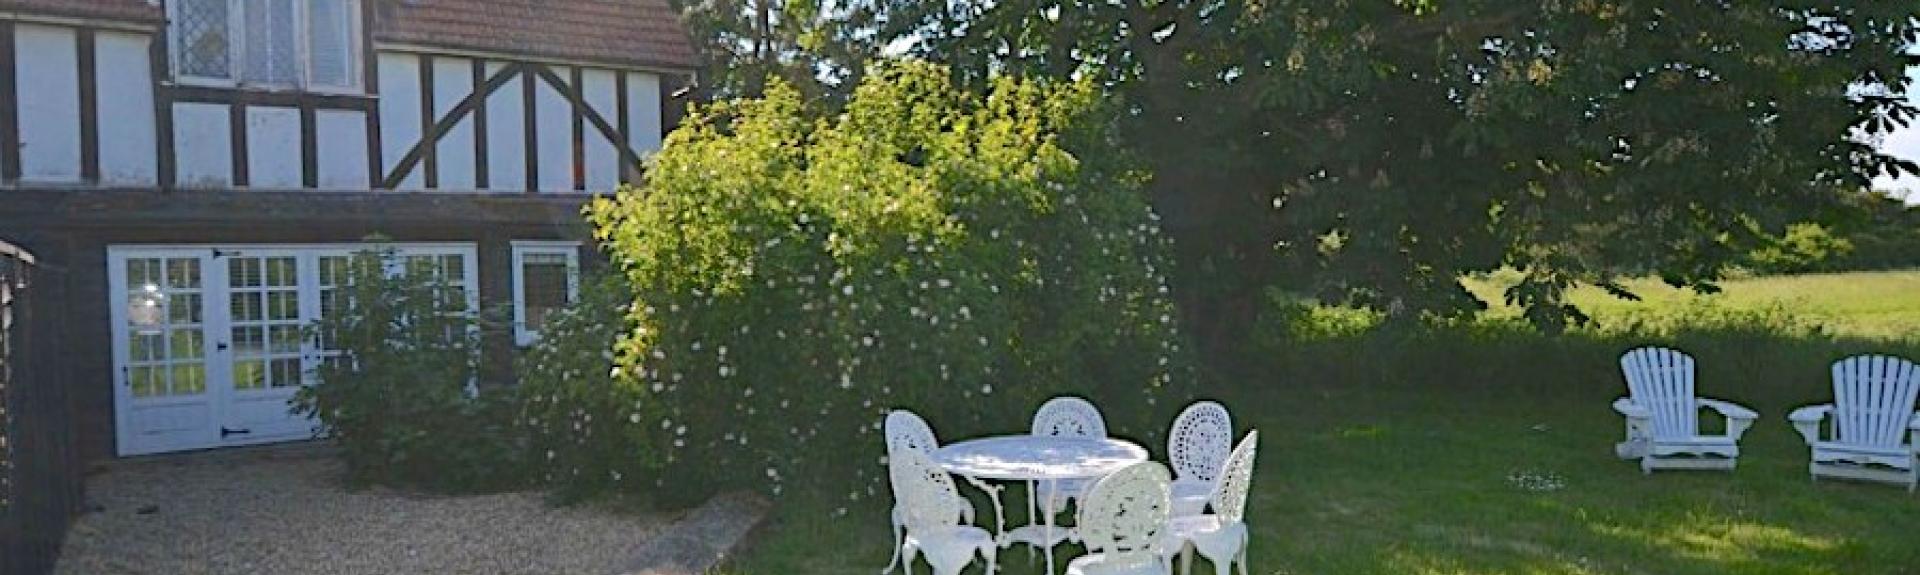 Outdoor dining chairs cluster around a table on a tree-lined lawn on Osea Island. Behind them is a cross-timbered holiday cottage on Osea Island.